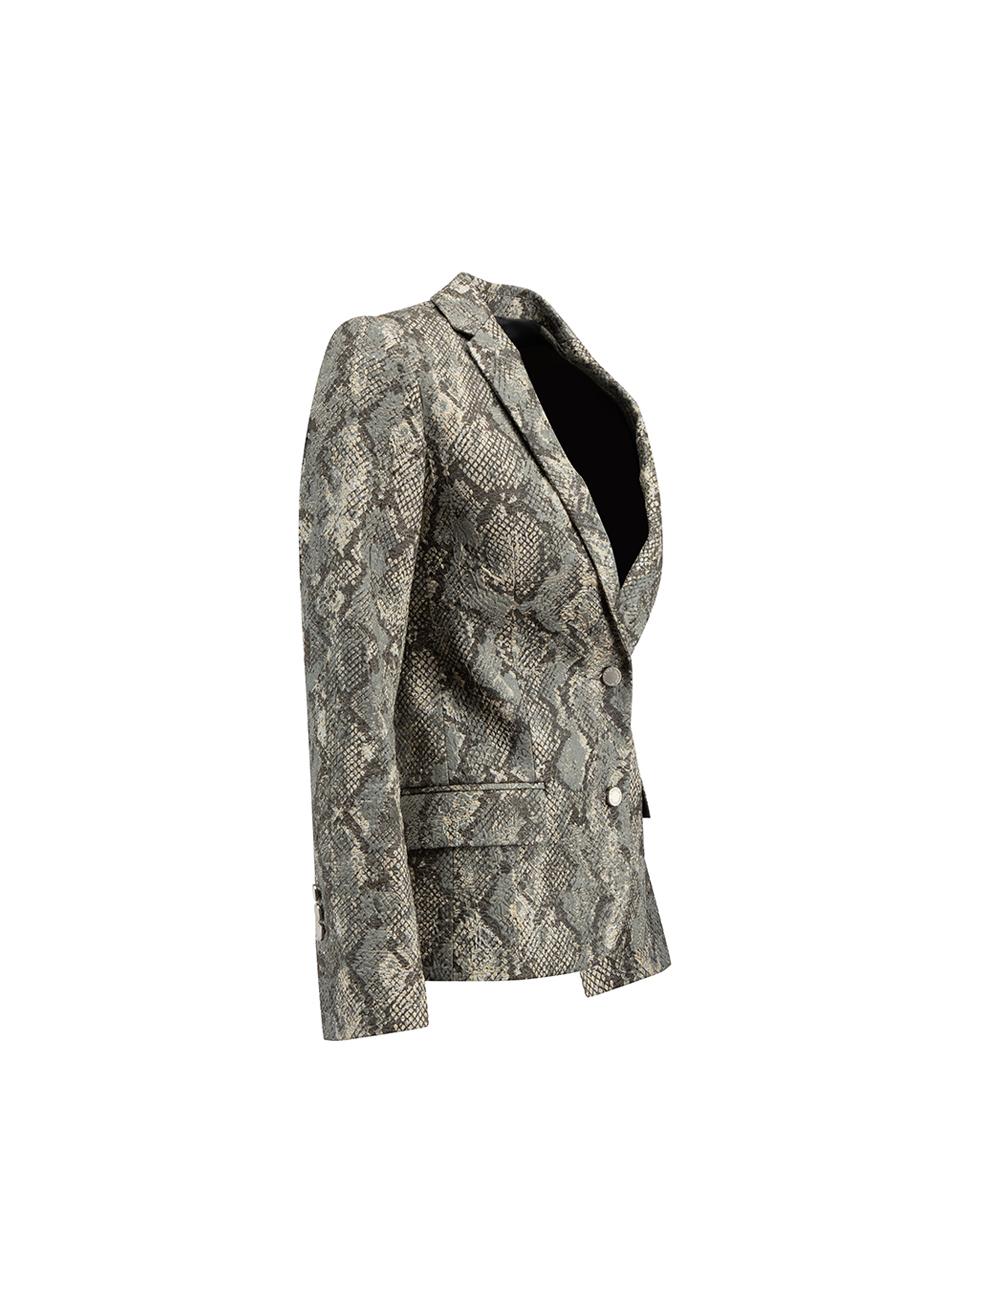 CONDITION is Very good. Hardly any visible wear to blazer is evident on this used Zadig & Voltaire designer resale item.





Details


Veda python deluxe 

Grey

Cotton

Blazer

Snakeskin pattern

Button up fastening

Buttoned cuffs

2x Front